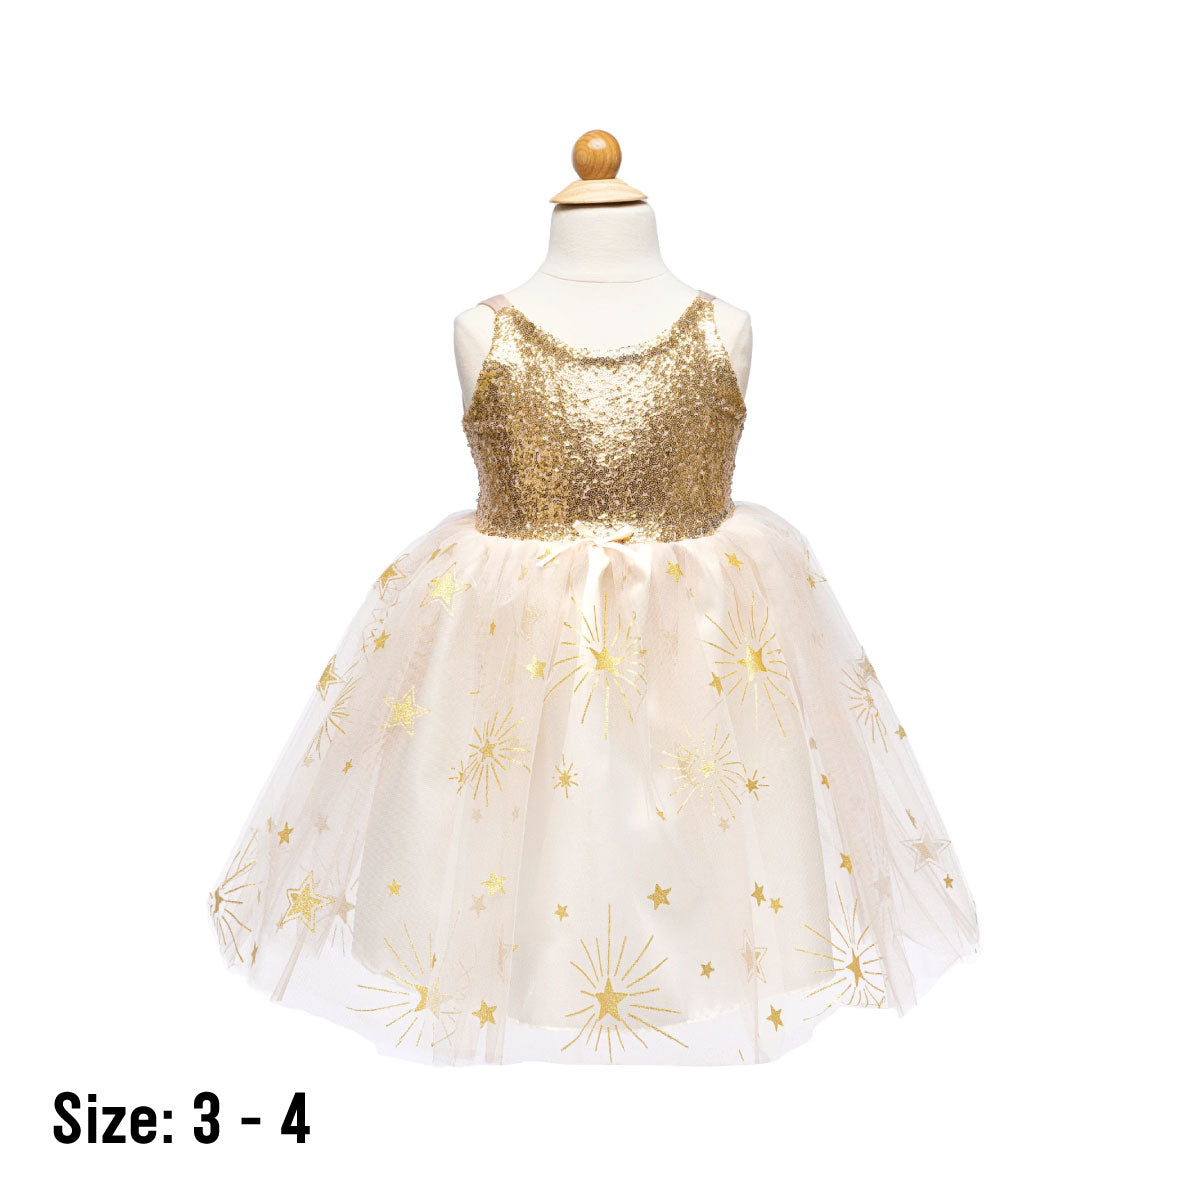 Great Pretenders Glam Party Gold Dress Size 3-4